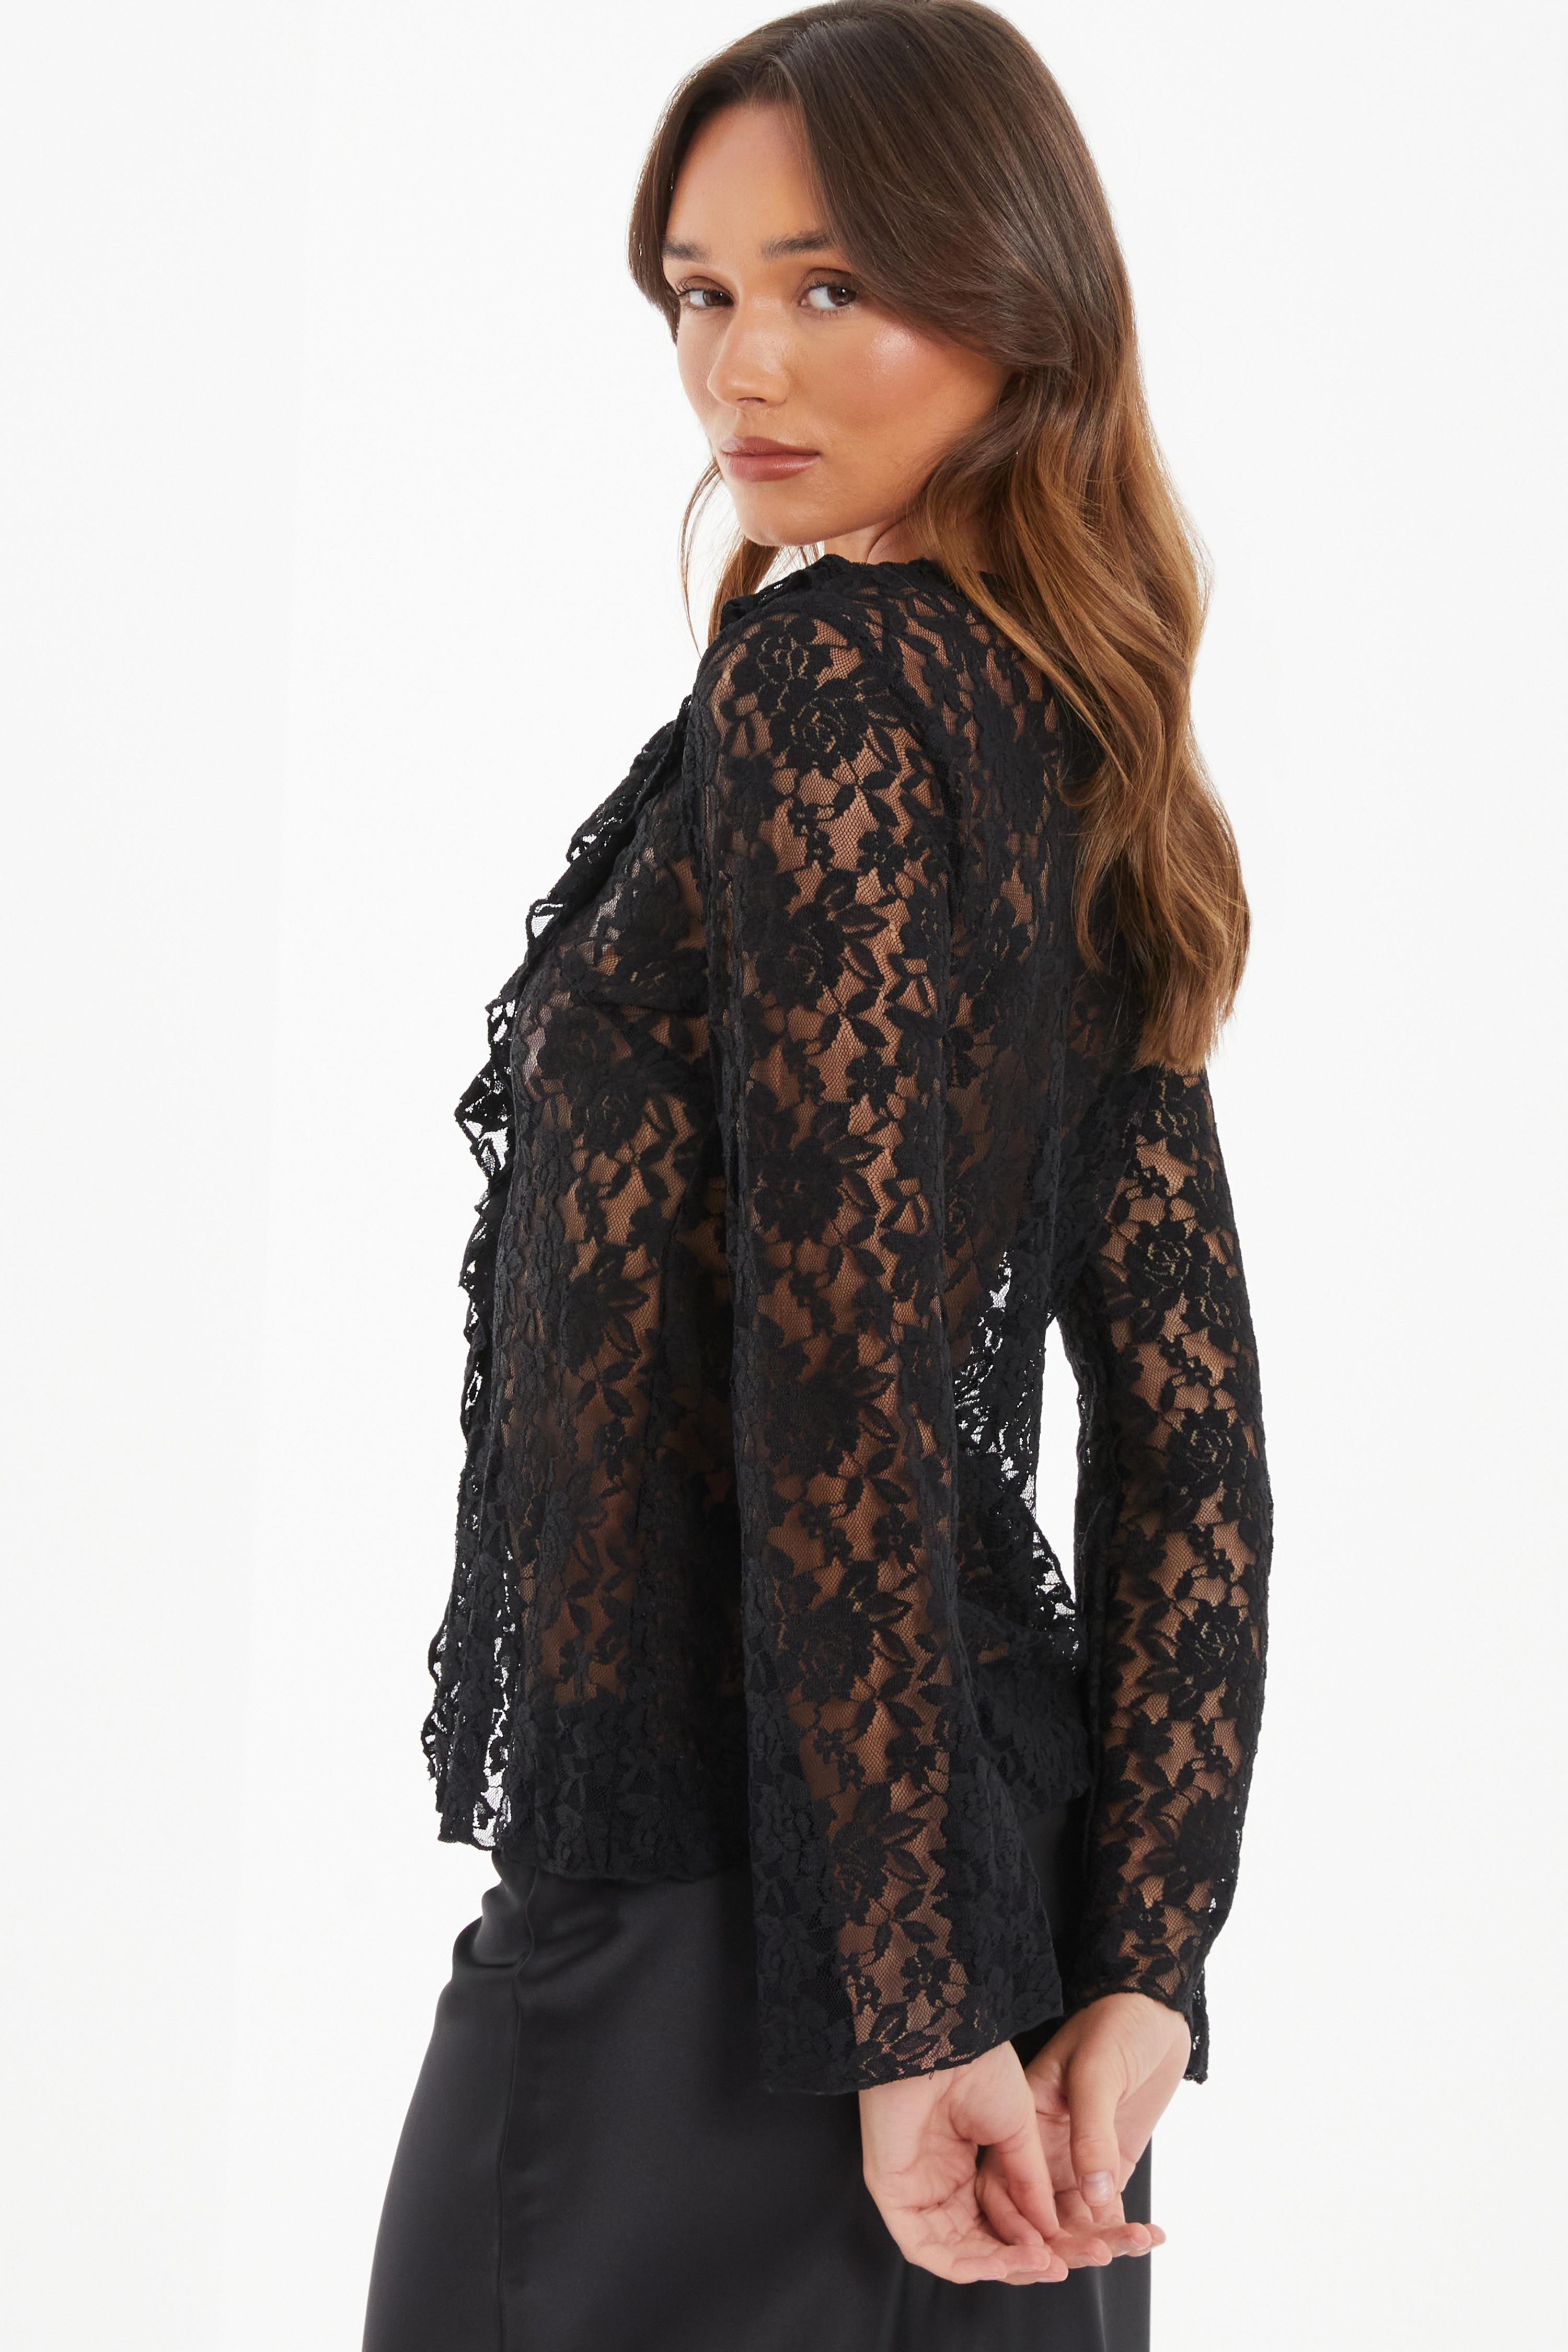 Black Lace Long Sleeve Tie Front Shirt, Tops